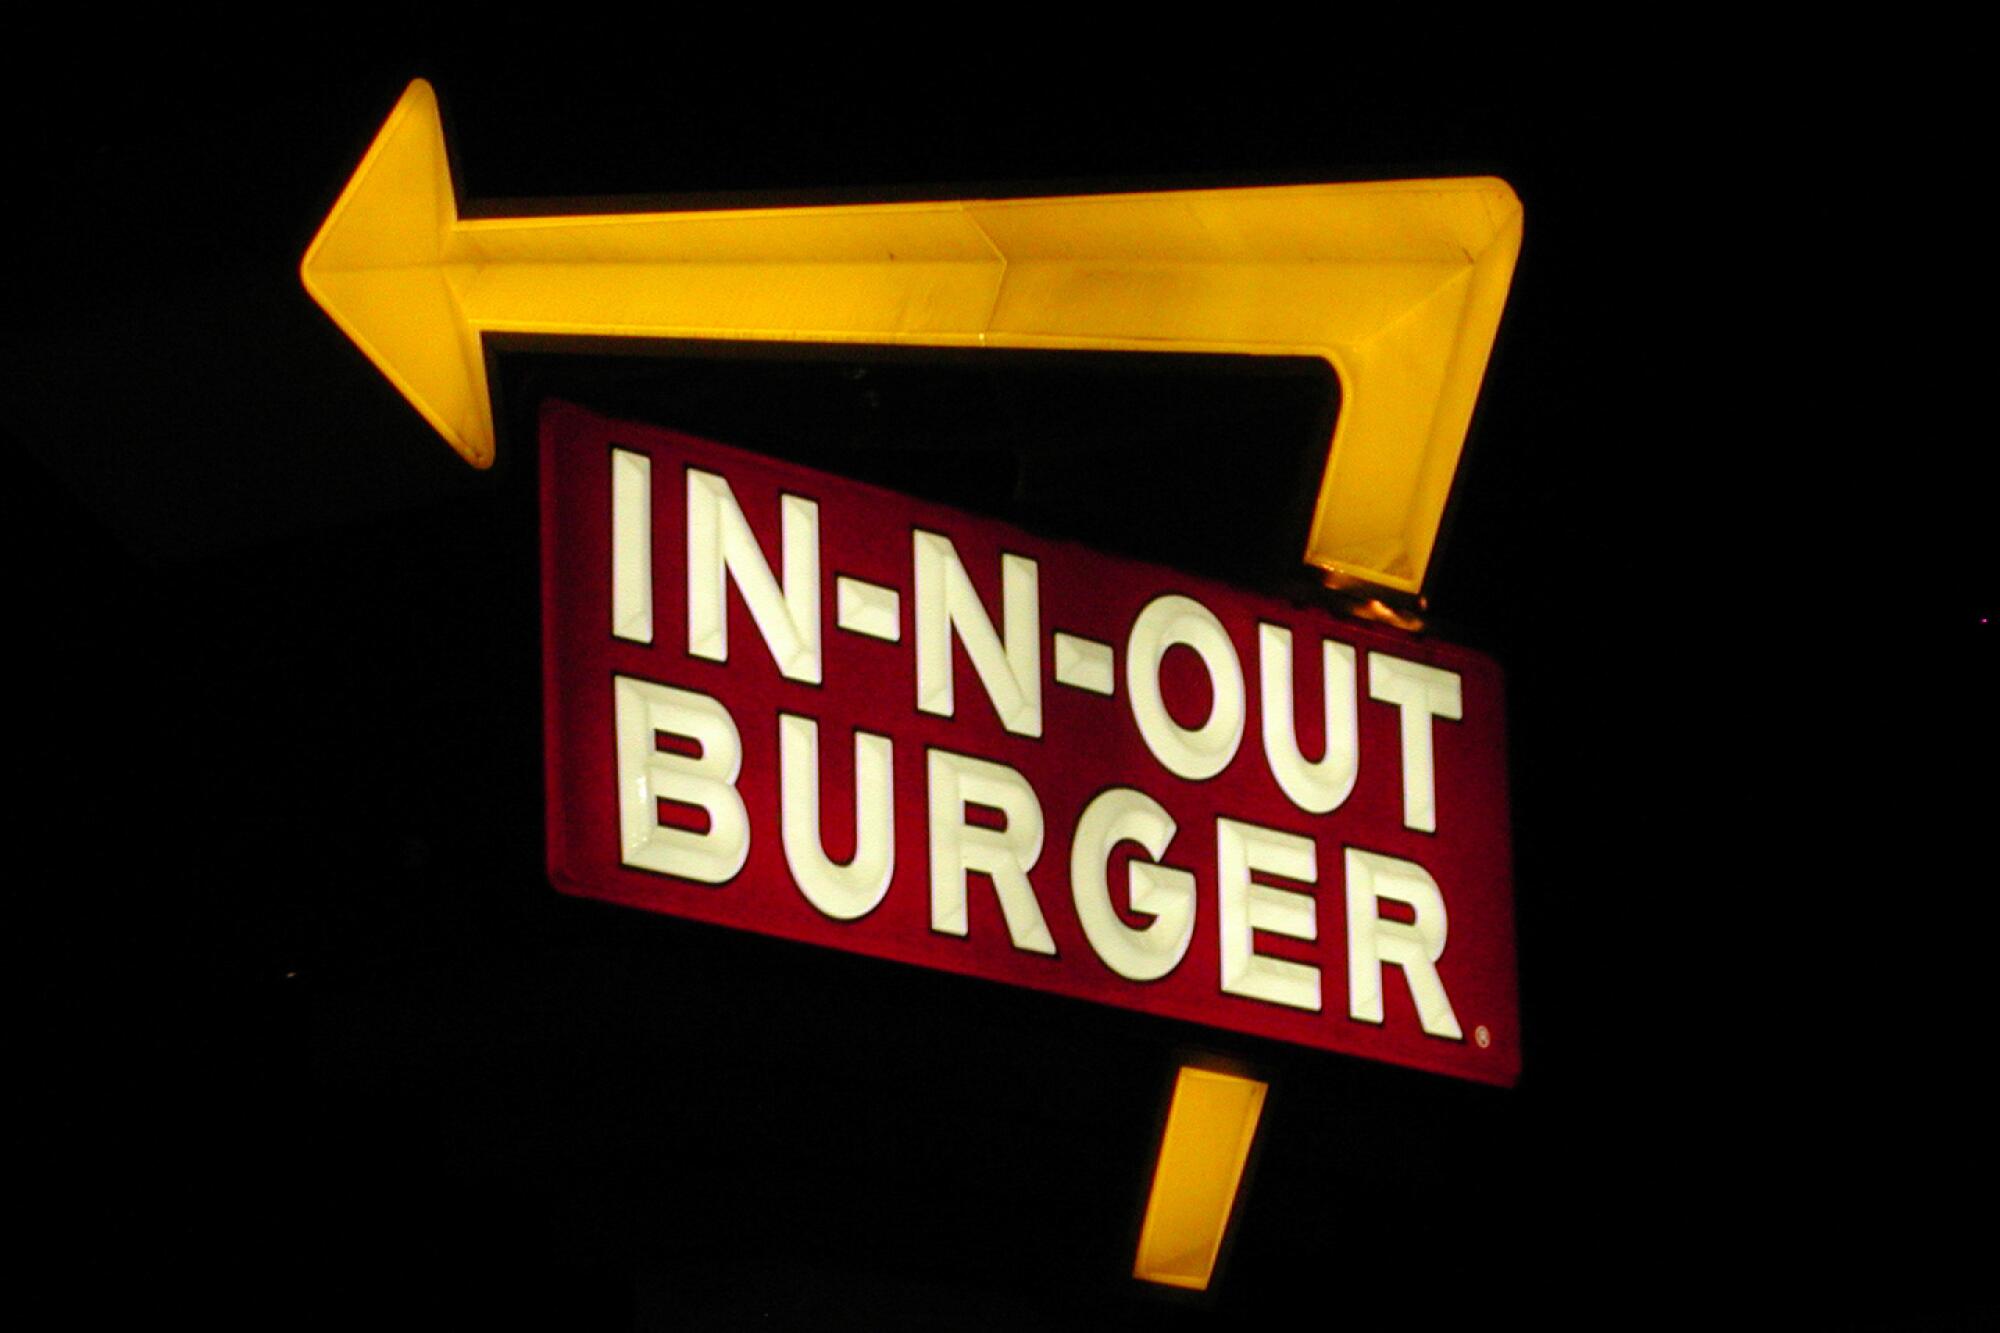 In-N-Out Burger sign in Camarillo, Calif., Saturday night, Aug. 20, 2005.